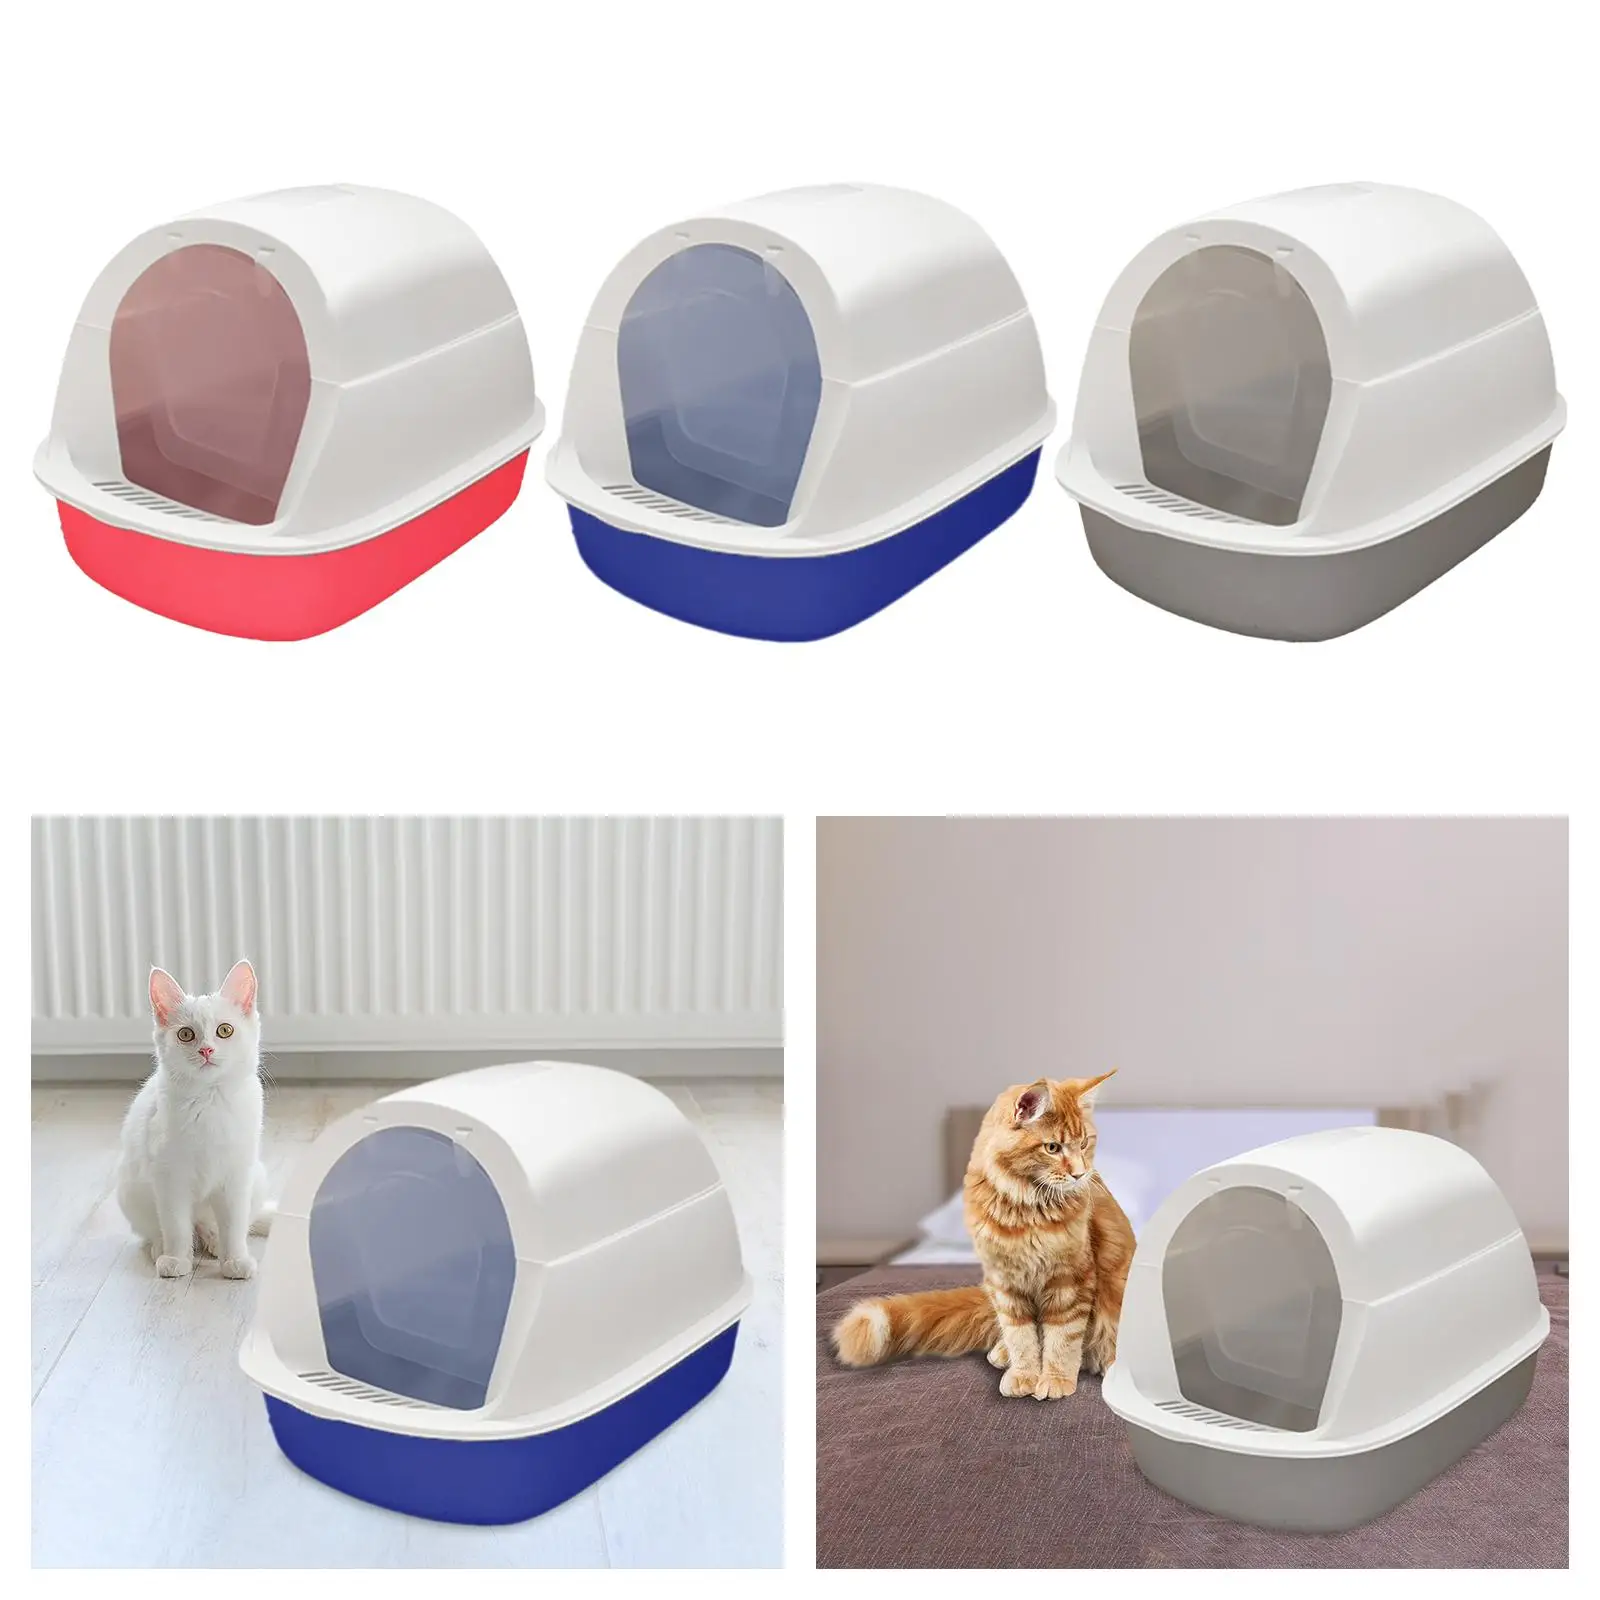 Hooded Cat Litter Box Litter Tray, Cat Toilet Pet Accessories, Fully Enclosed Cat Litter Box Sandbox for Indoor Cats